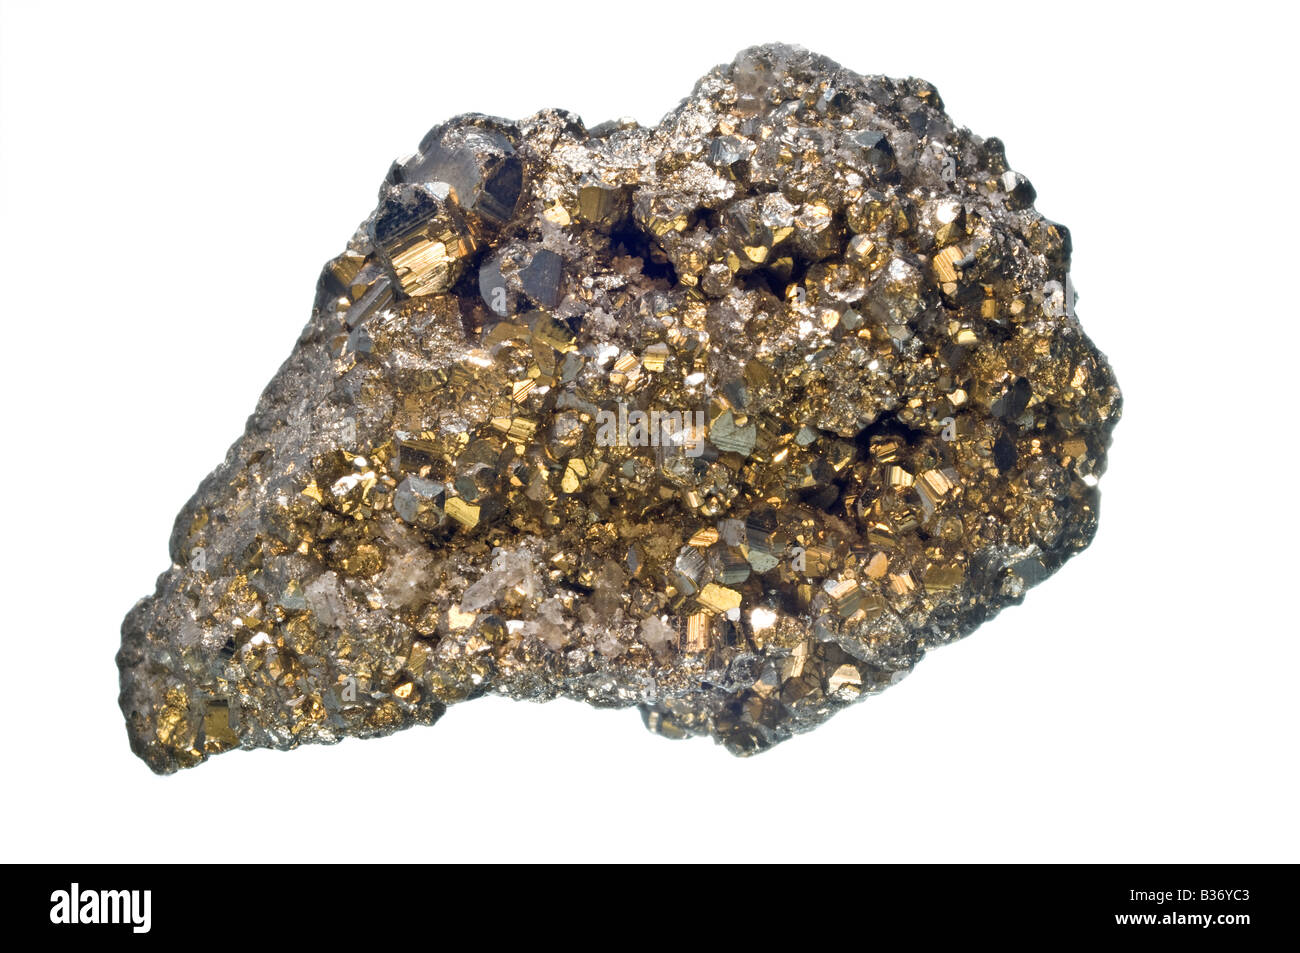 Pyrite: The Real Story Behind “Fool's Gold”